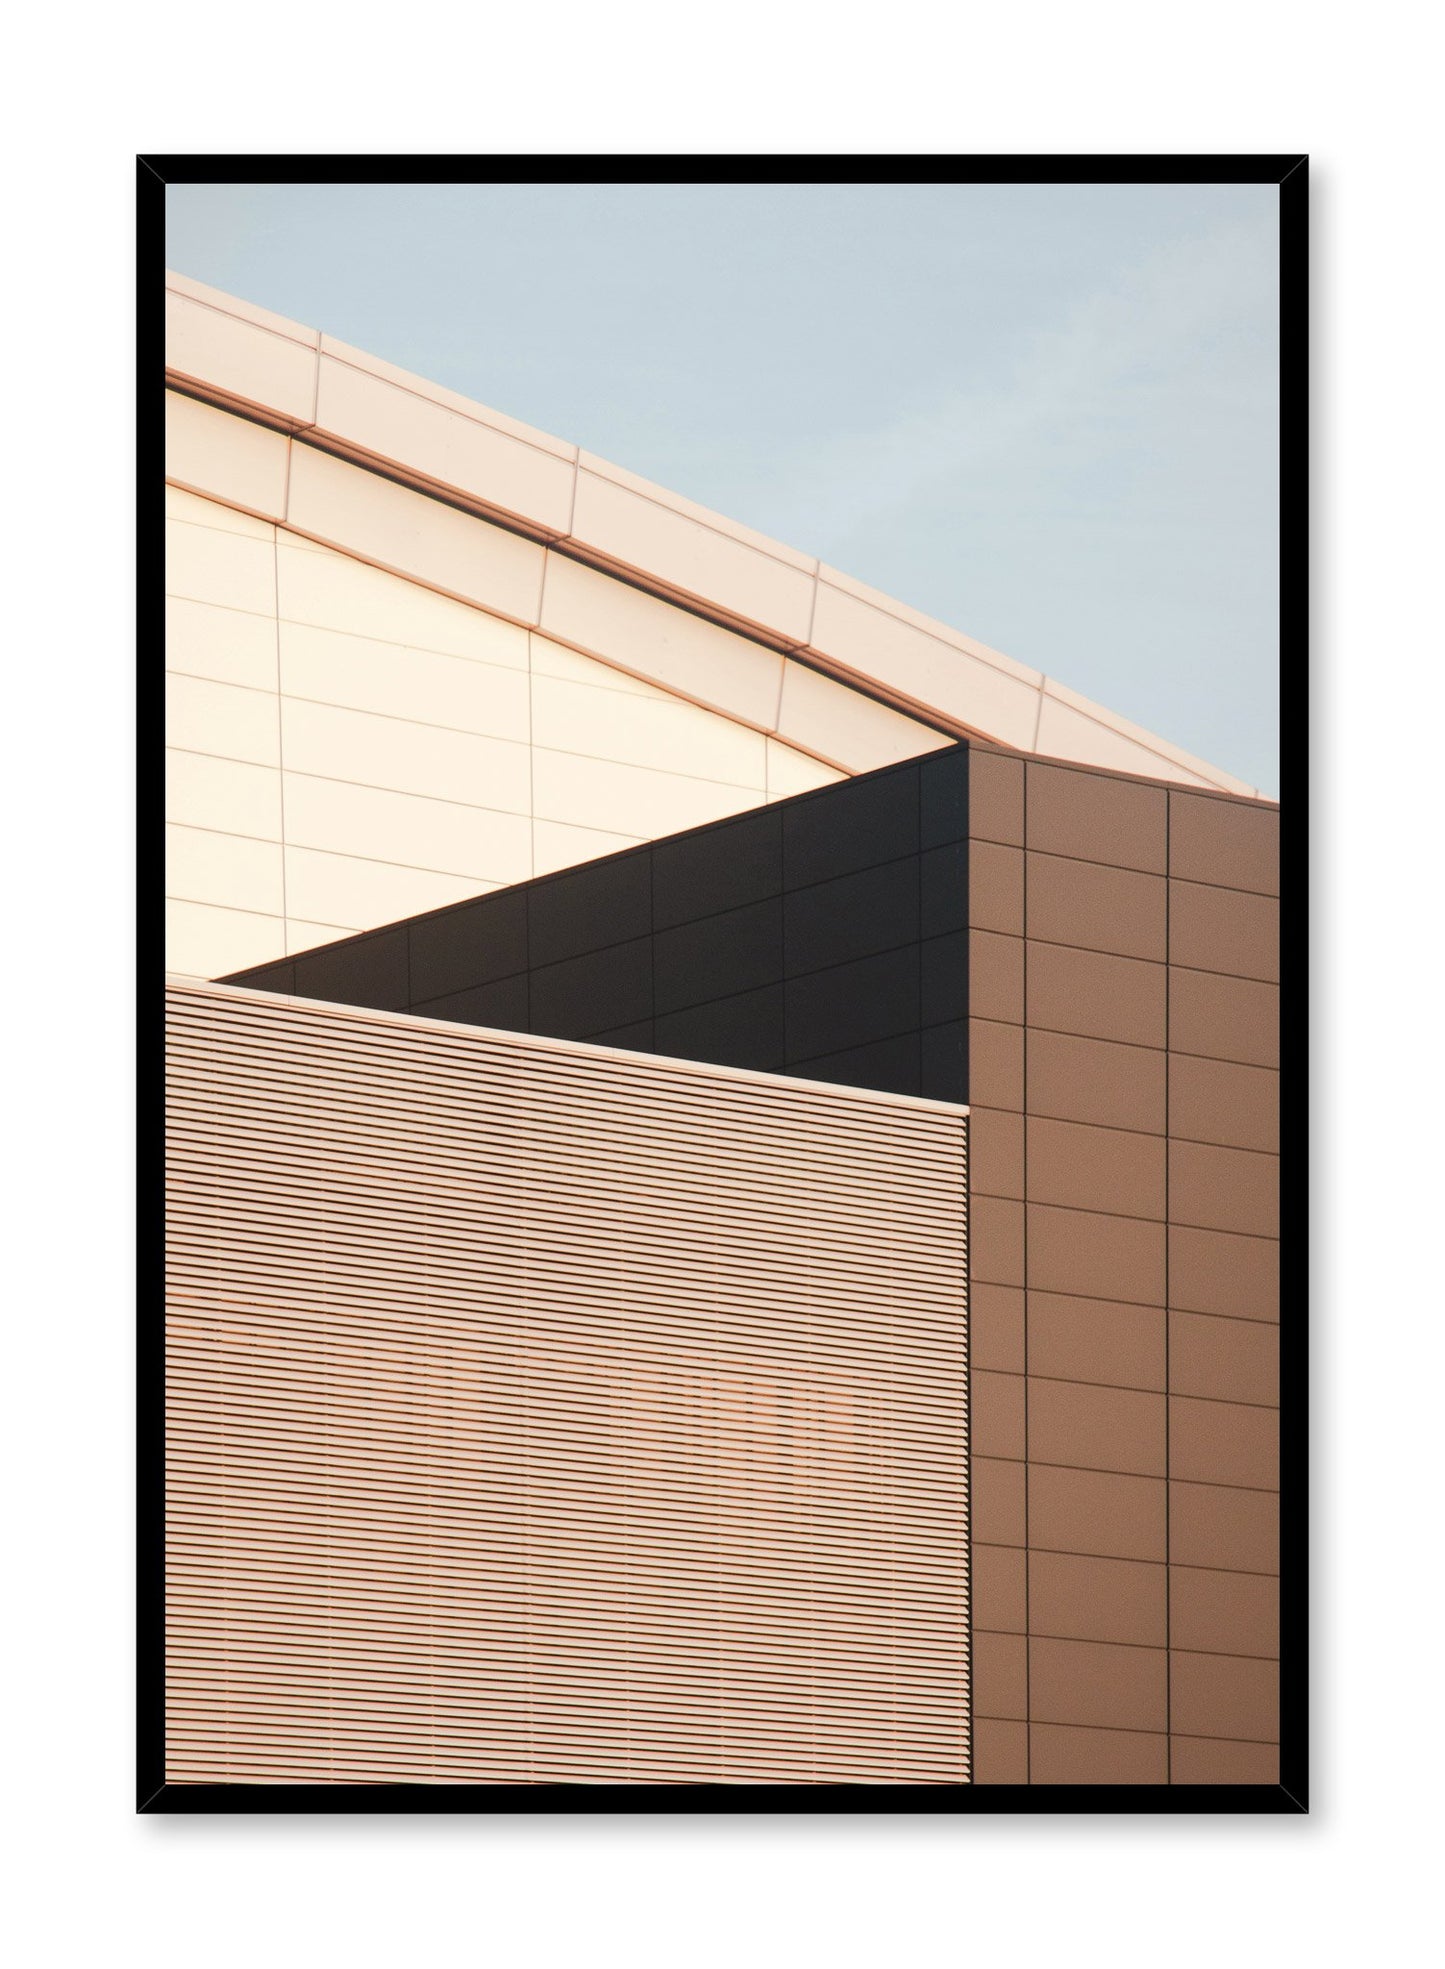 Modern minimalist poster by Opposite Wall with photography of buildings with beige bricks